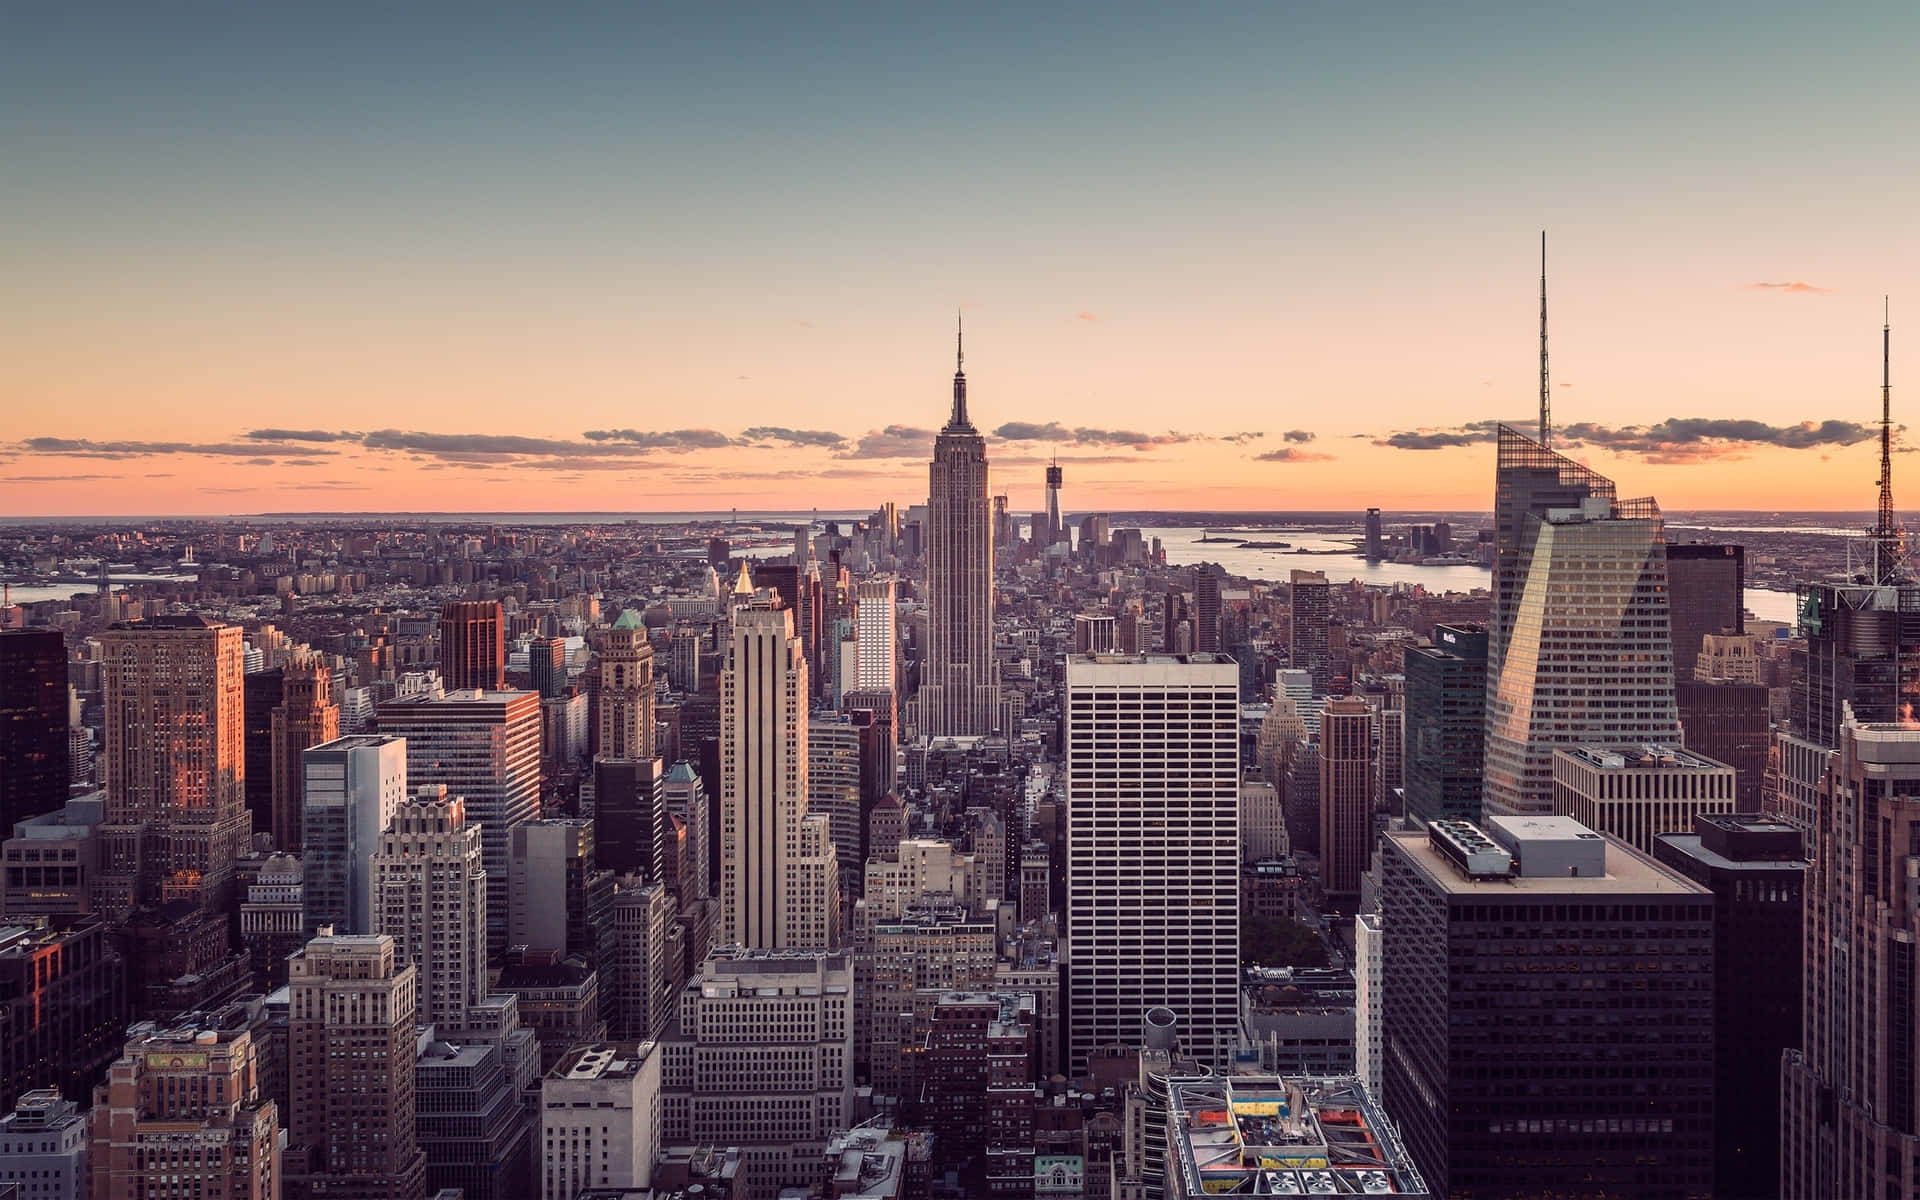 Explore The Big Apple in Style With Ny Desktop Wallpaper